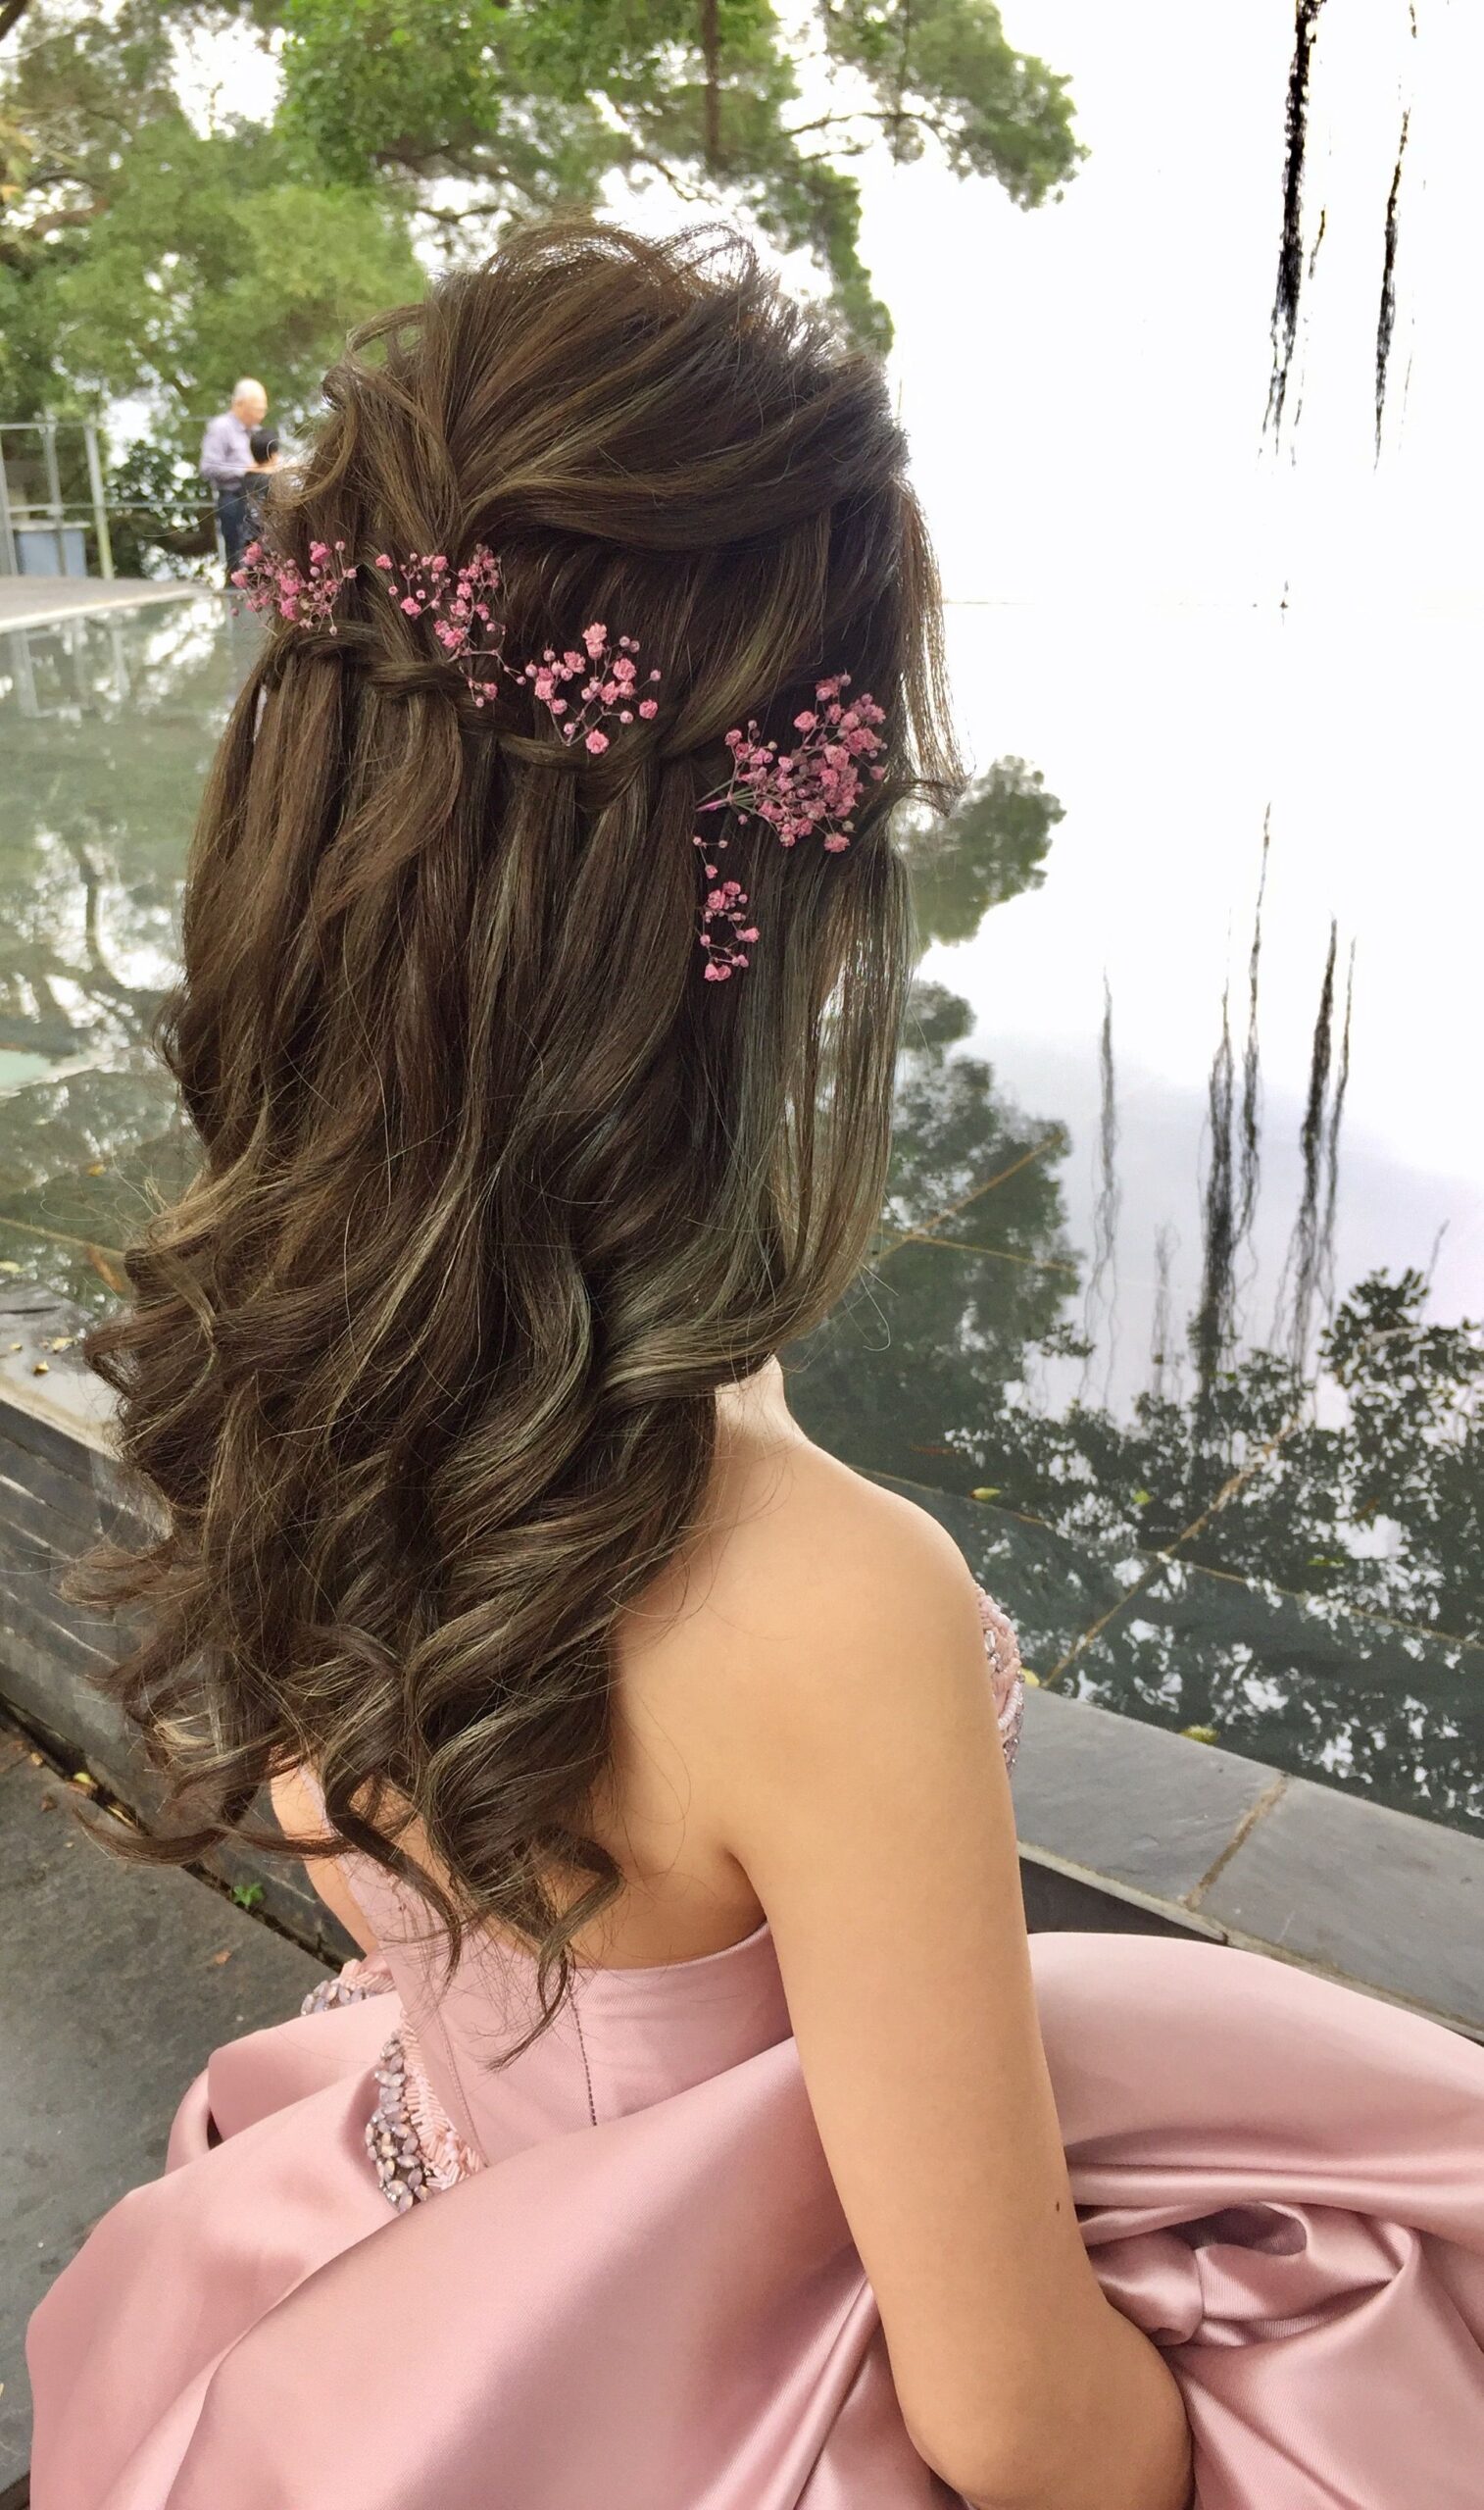 Top Stunning Wedding Hairstyles to Say ‘I Do’ in Style